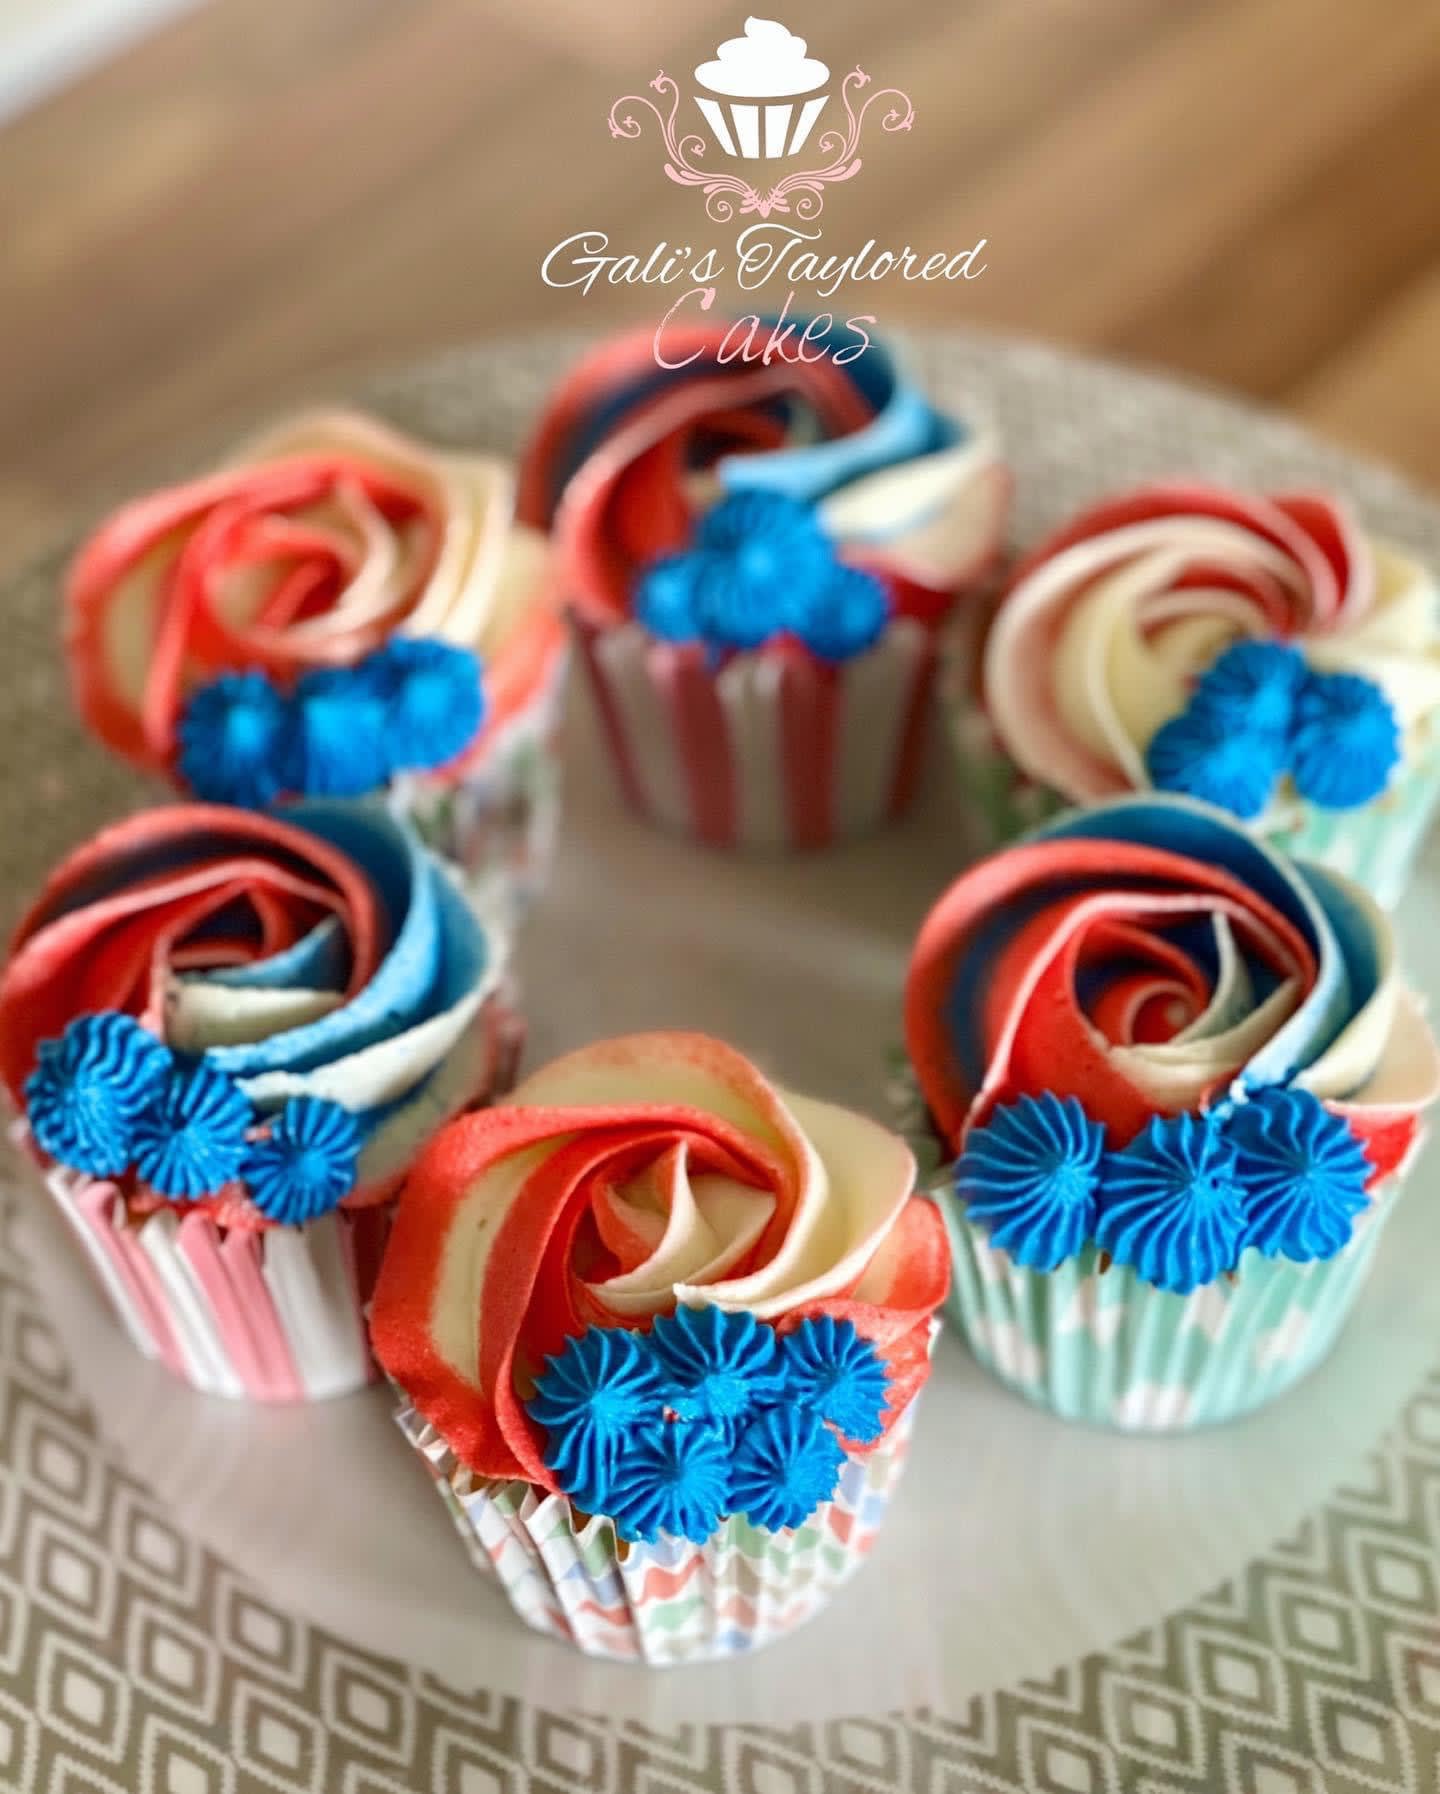 Images Gali's Taylored Cakes